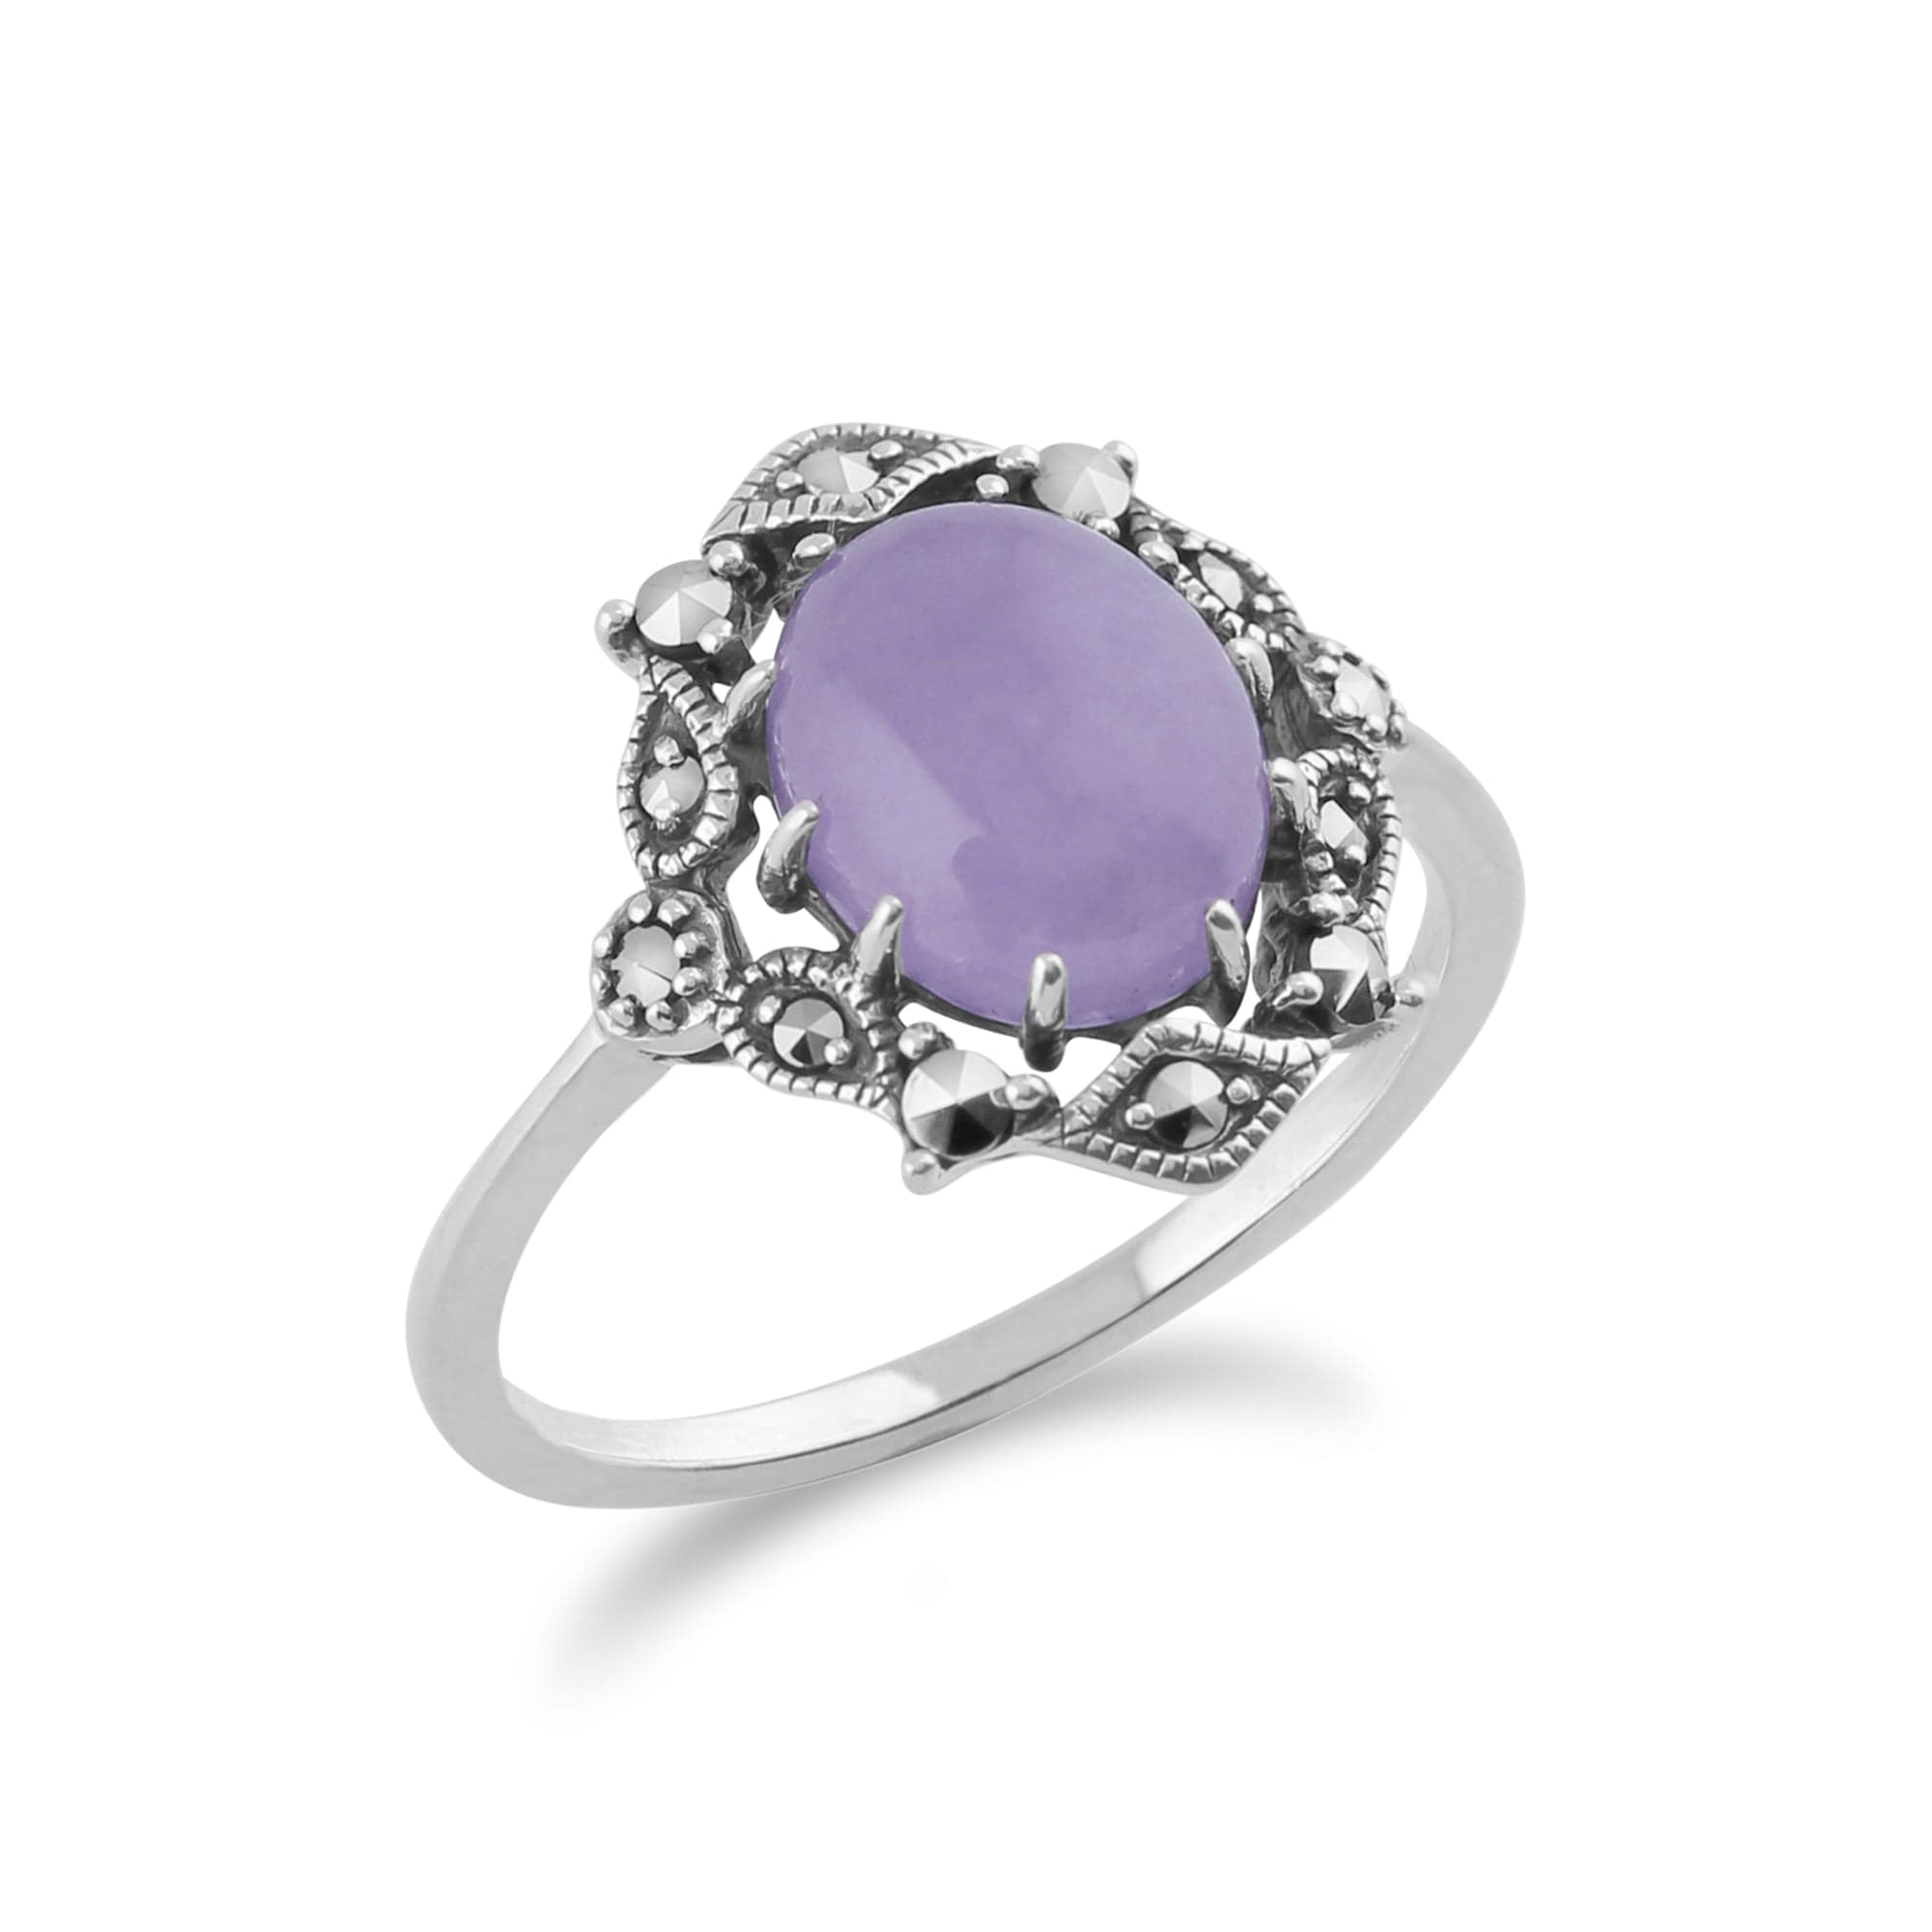 Art Nouveau Style Oval Lavender Jade Cabochon & Marcasite Statement Ring in 925 Sterling Silver - Gemondo